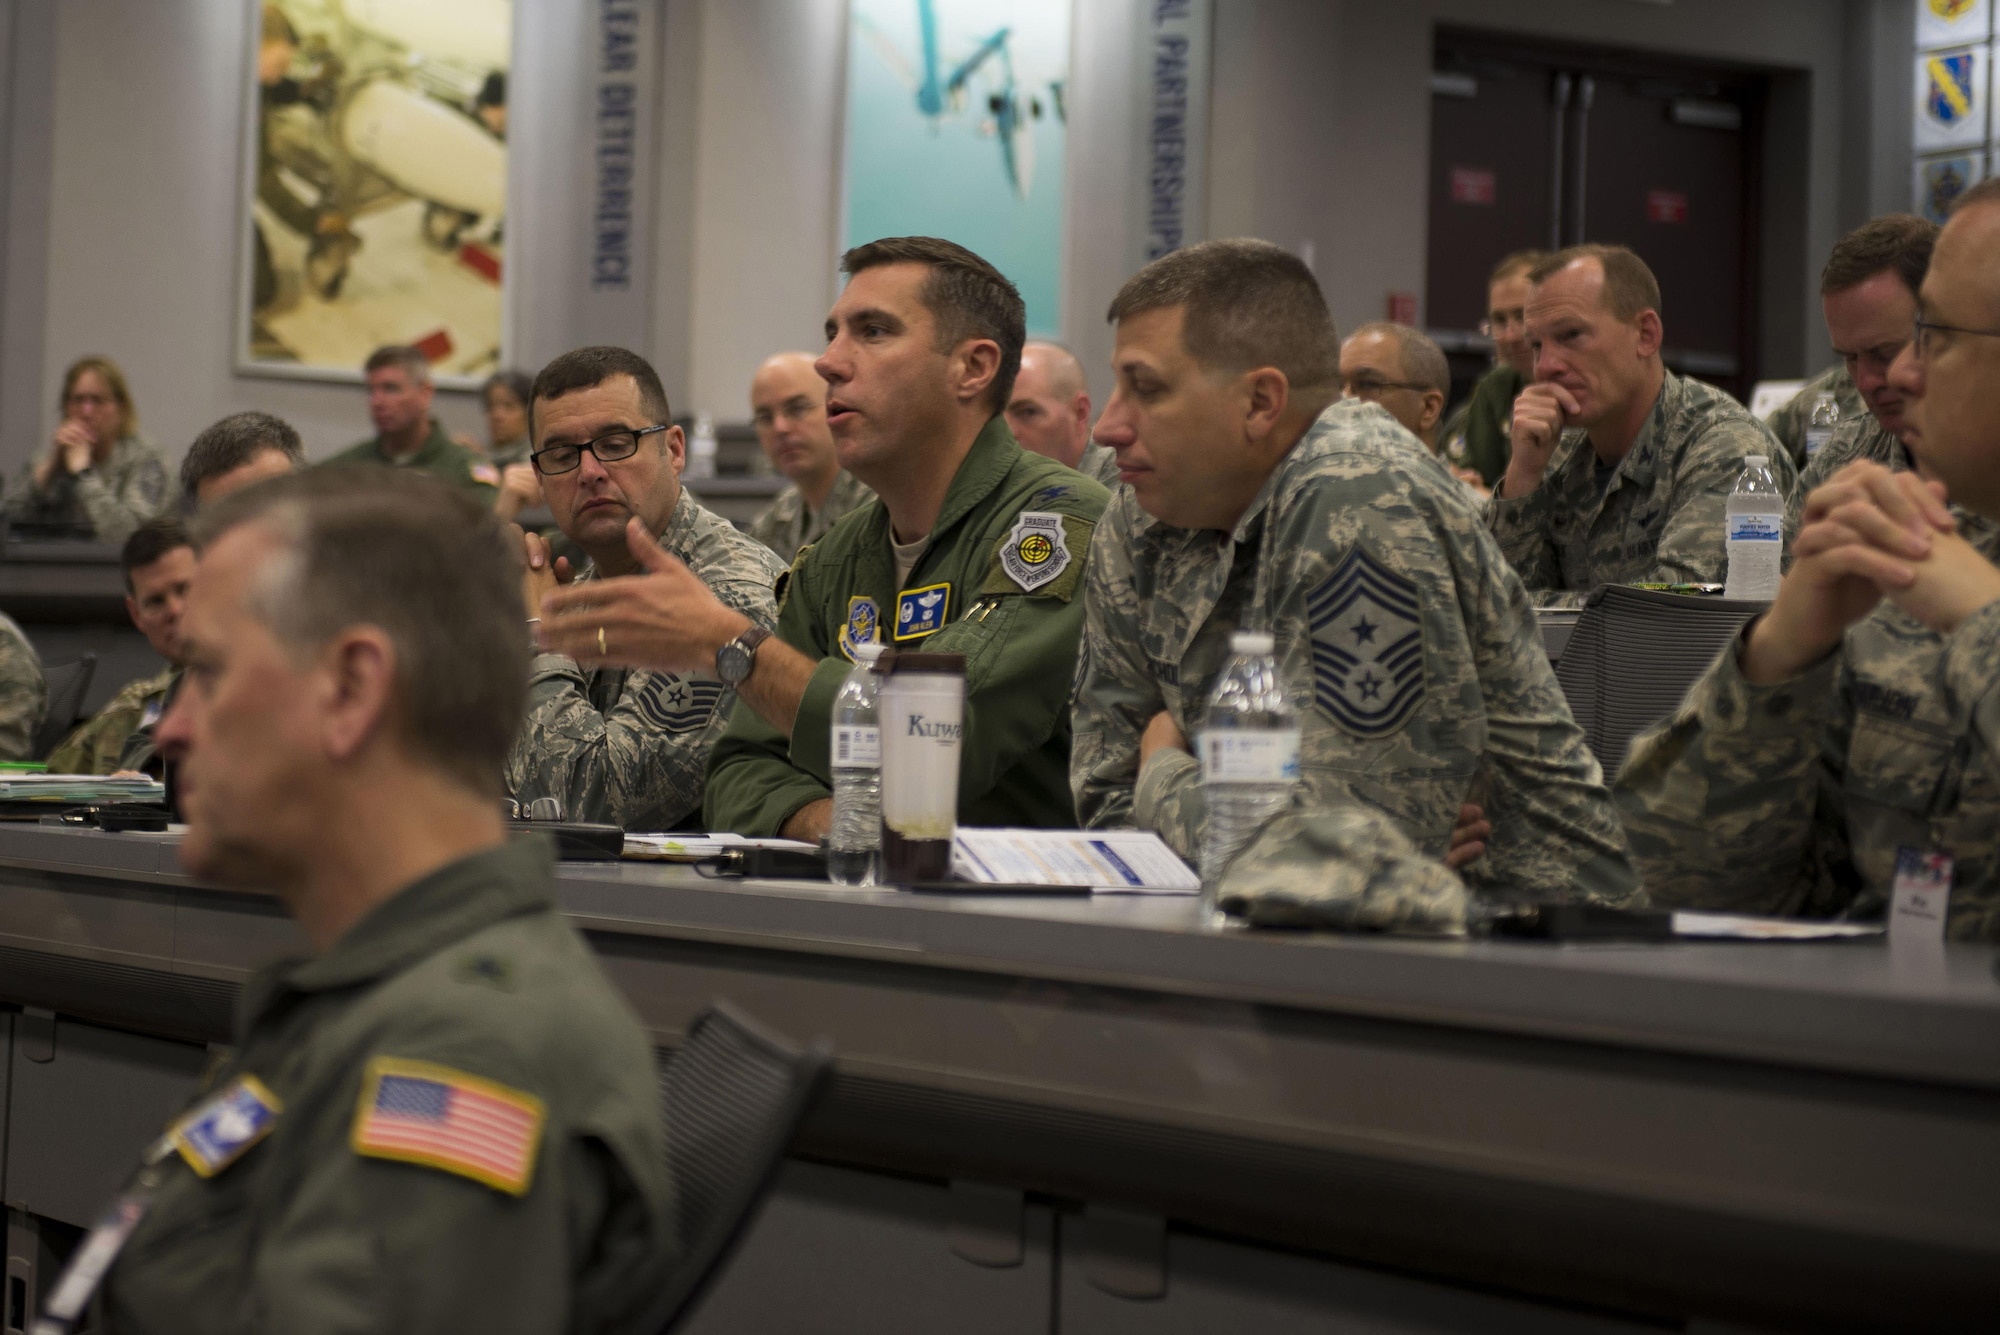 Col. John Klein, Jr., 60th Air Mobility Wing commander, asks a question during the 2017 Spring Phoenix Rally at Scott Air Force Base, Illinois, April 28. During Phoenix Rally, AMC leaders discussed a range of total force issues to include squadron revitalization, strengthening joint leaders and teams, pilot shortage, and the demand of mobility air force capability worldwide. (U.S. Air Force photo by Staff Sgt. Clayton Lenhardt)